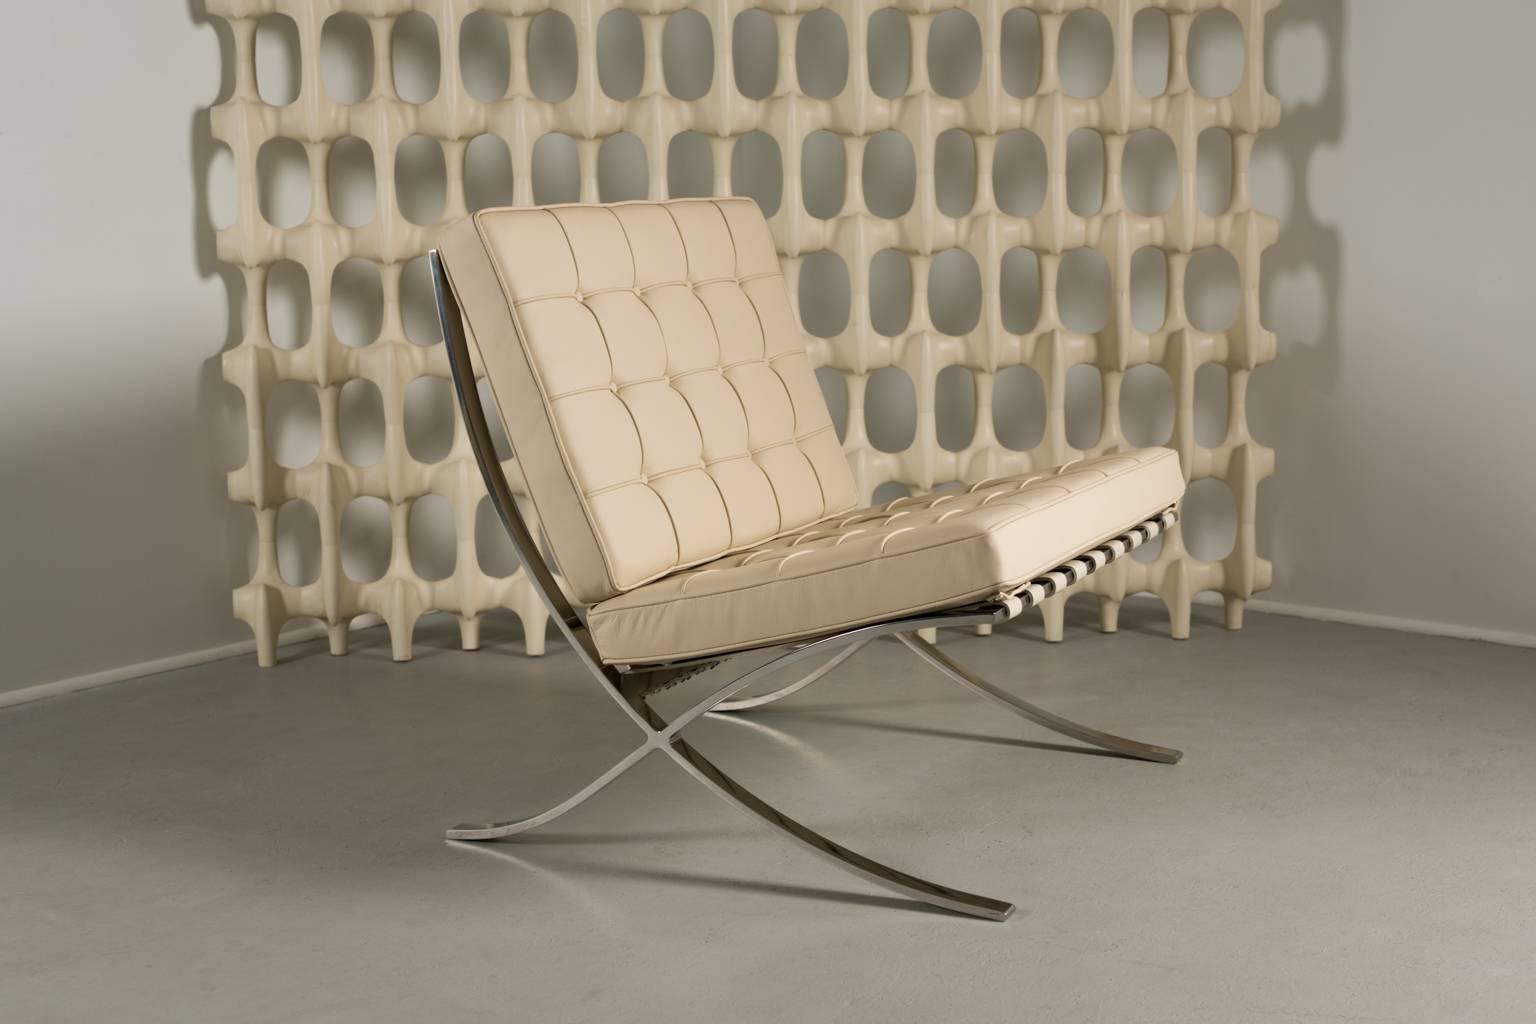 "Barcelona" chair designed by Ludwig Mies van der Rohe and produced by Knoll.

USA, Knoll

Measures: 30 W x 30 D x 30 H in.
77 W x 77 D x 77 H cm.

Stainless steel frames with new leather.